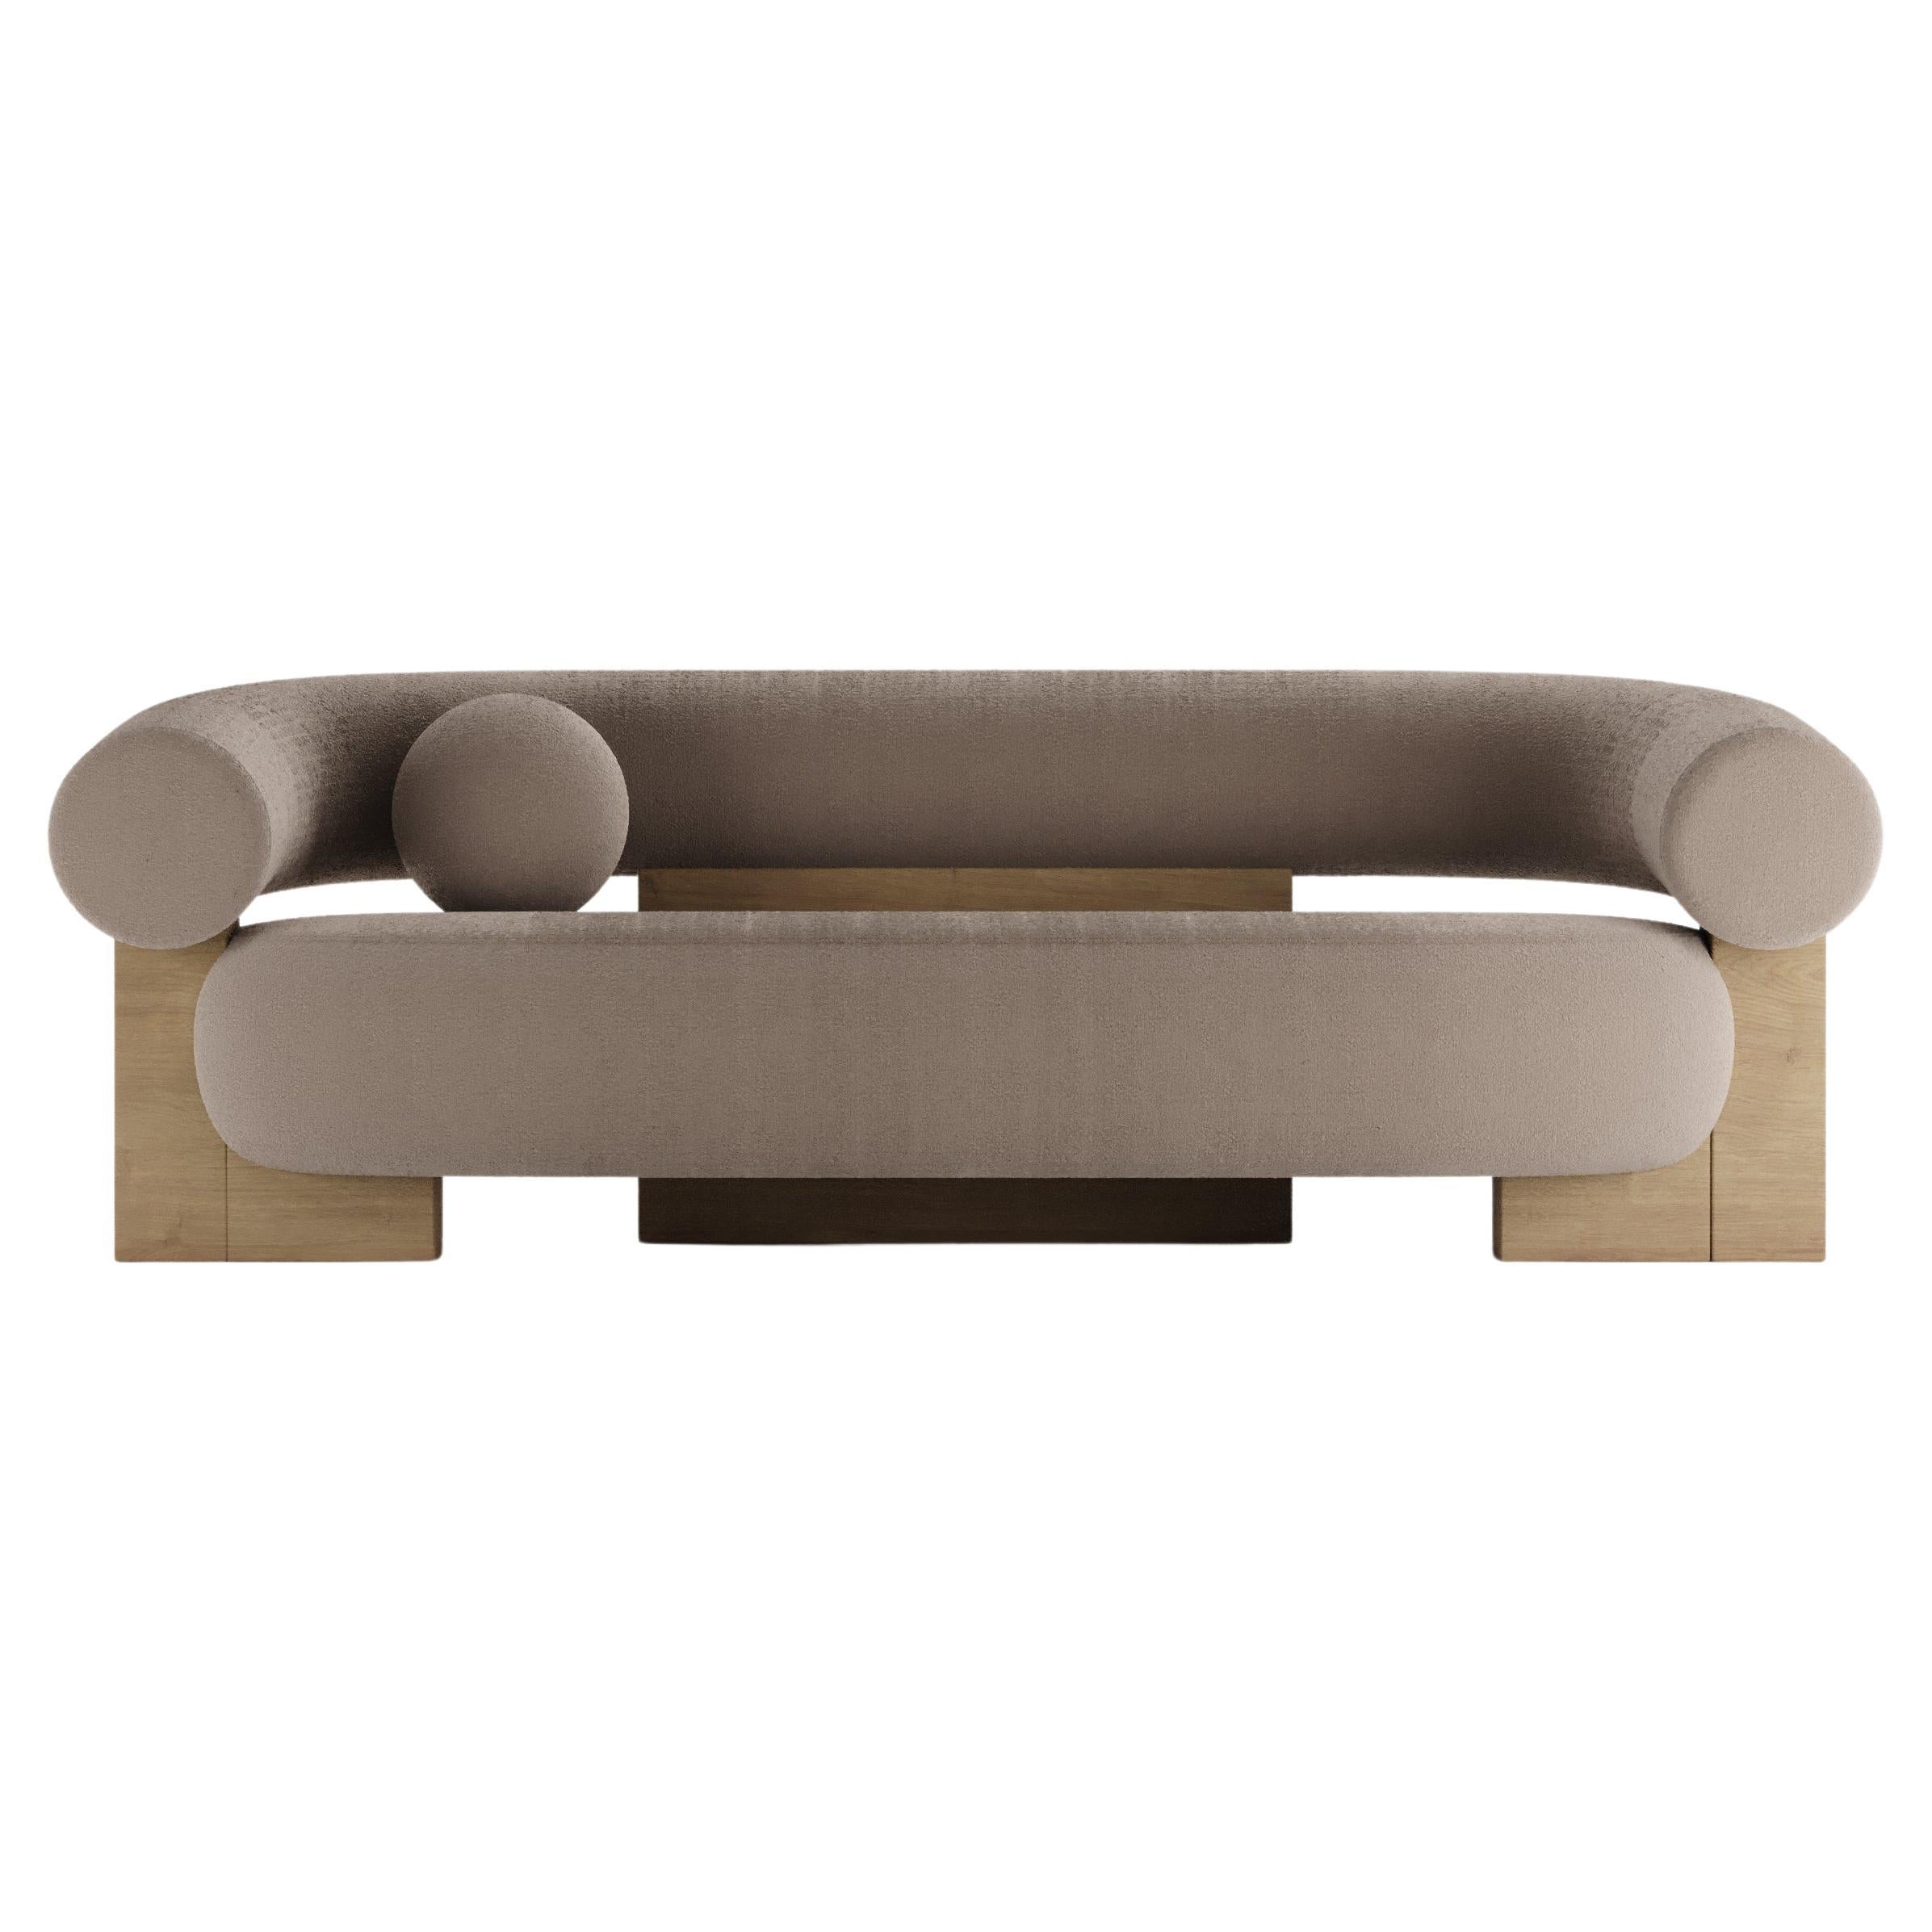 Contemporary Modern Cassete Sofa in Fabric & Wood by Collector Studio